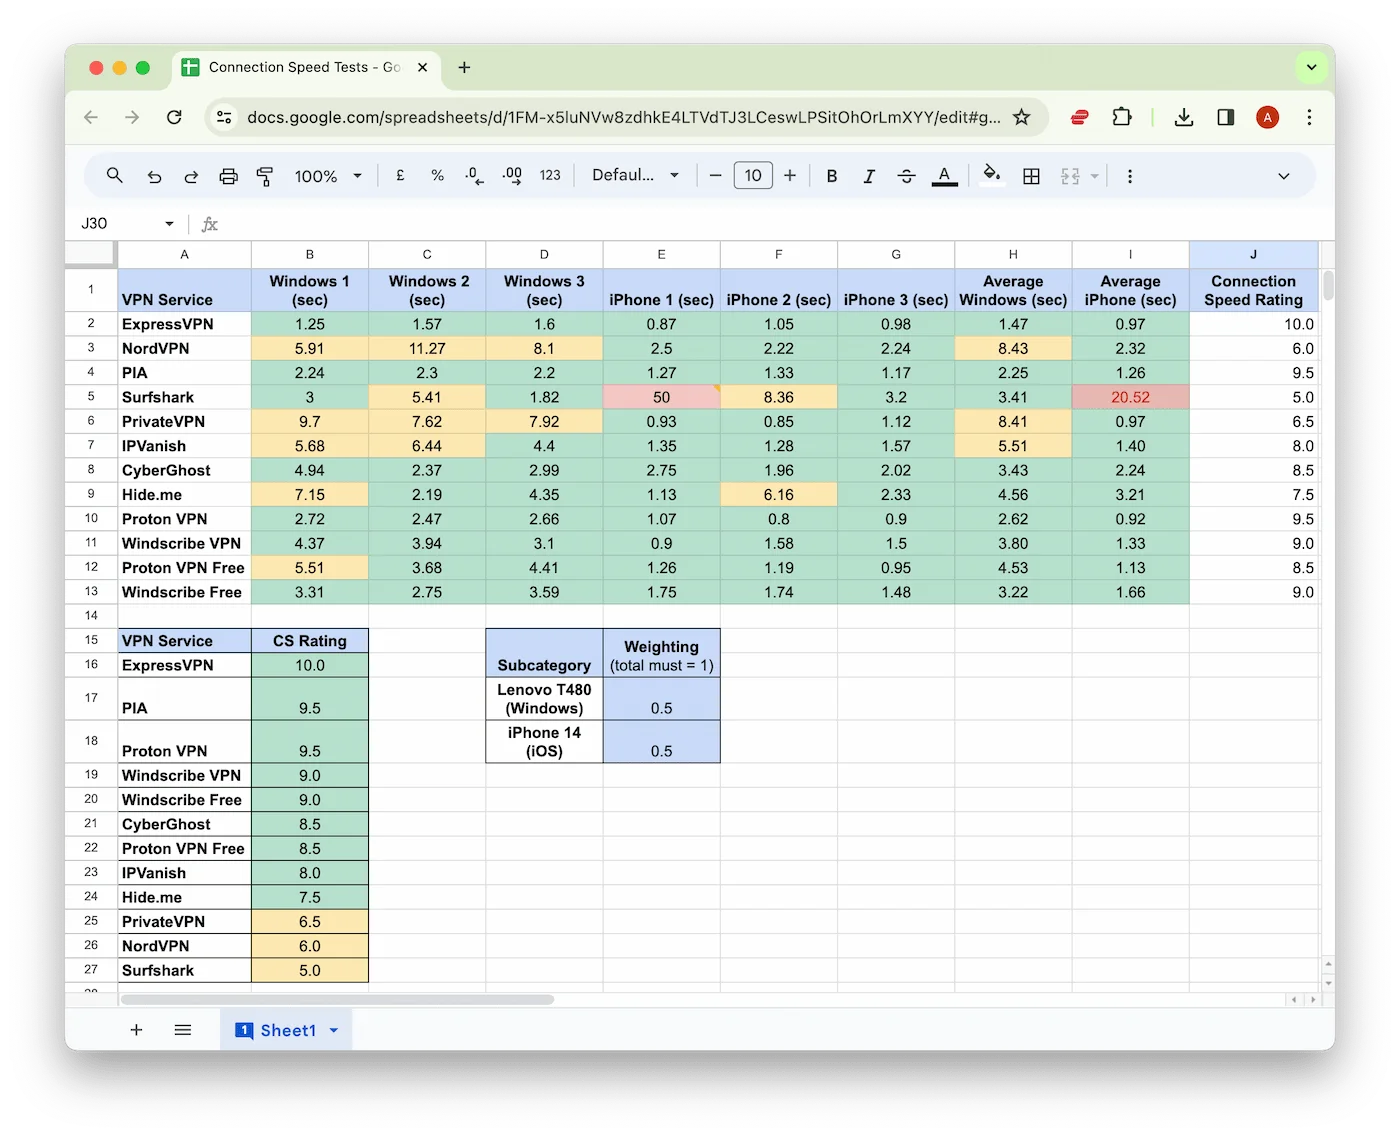 Screenshot of our Google Sheet with connection time test data and ratings.